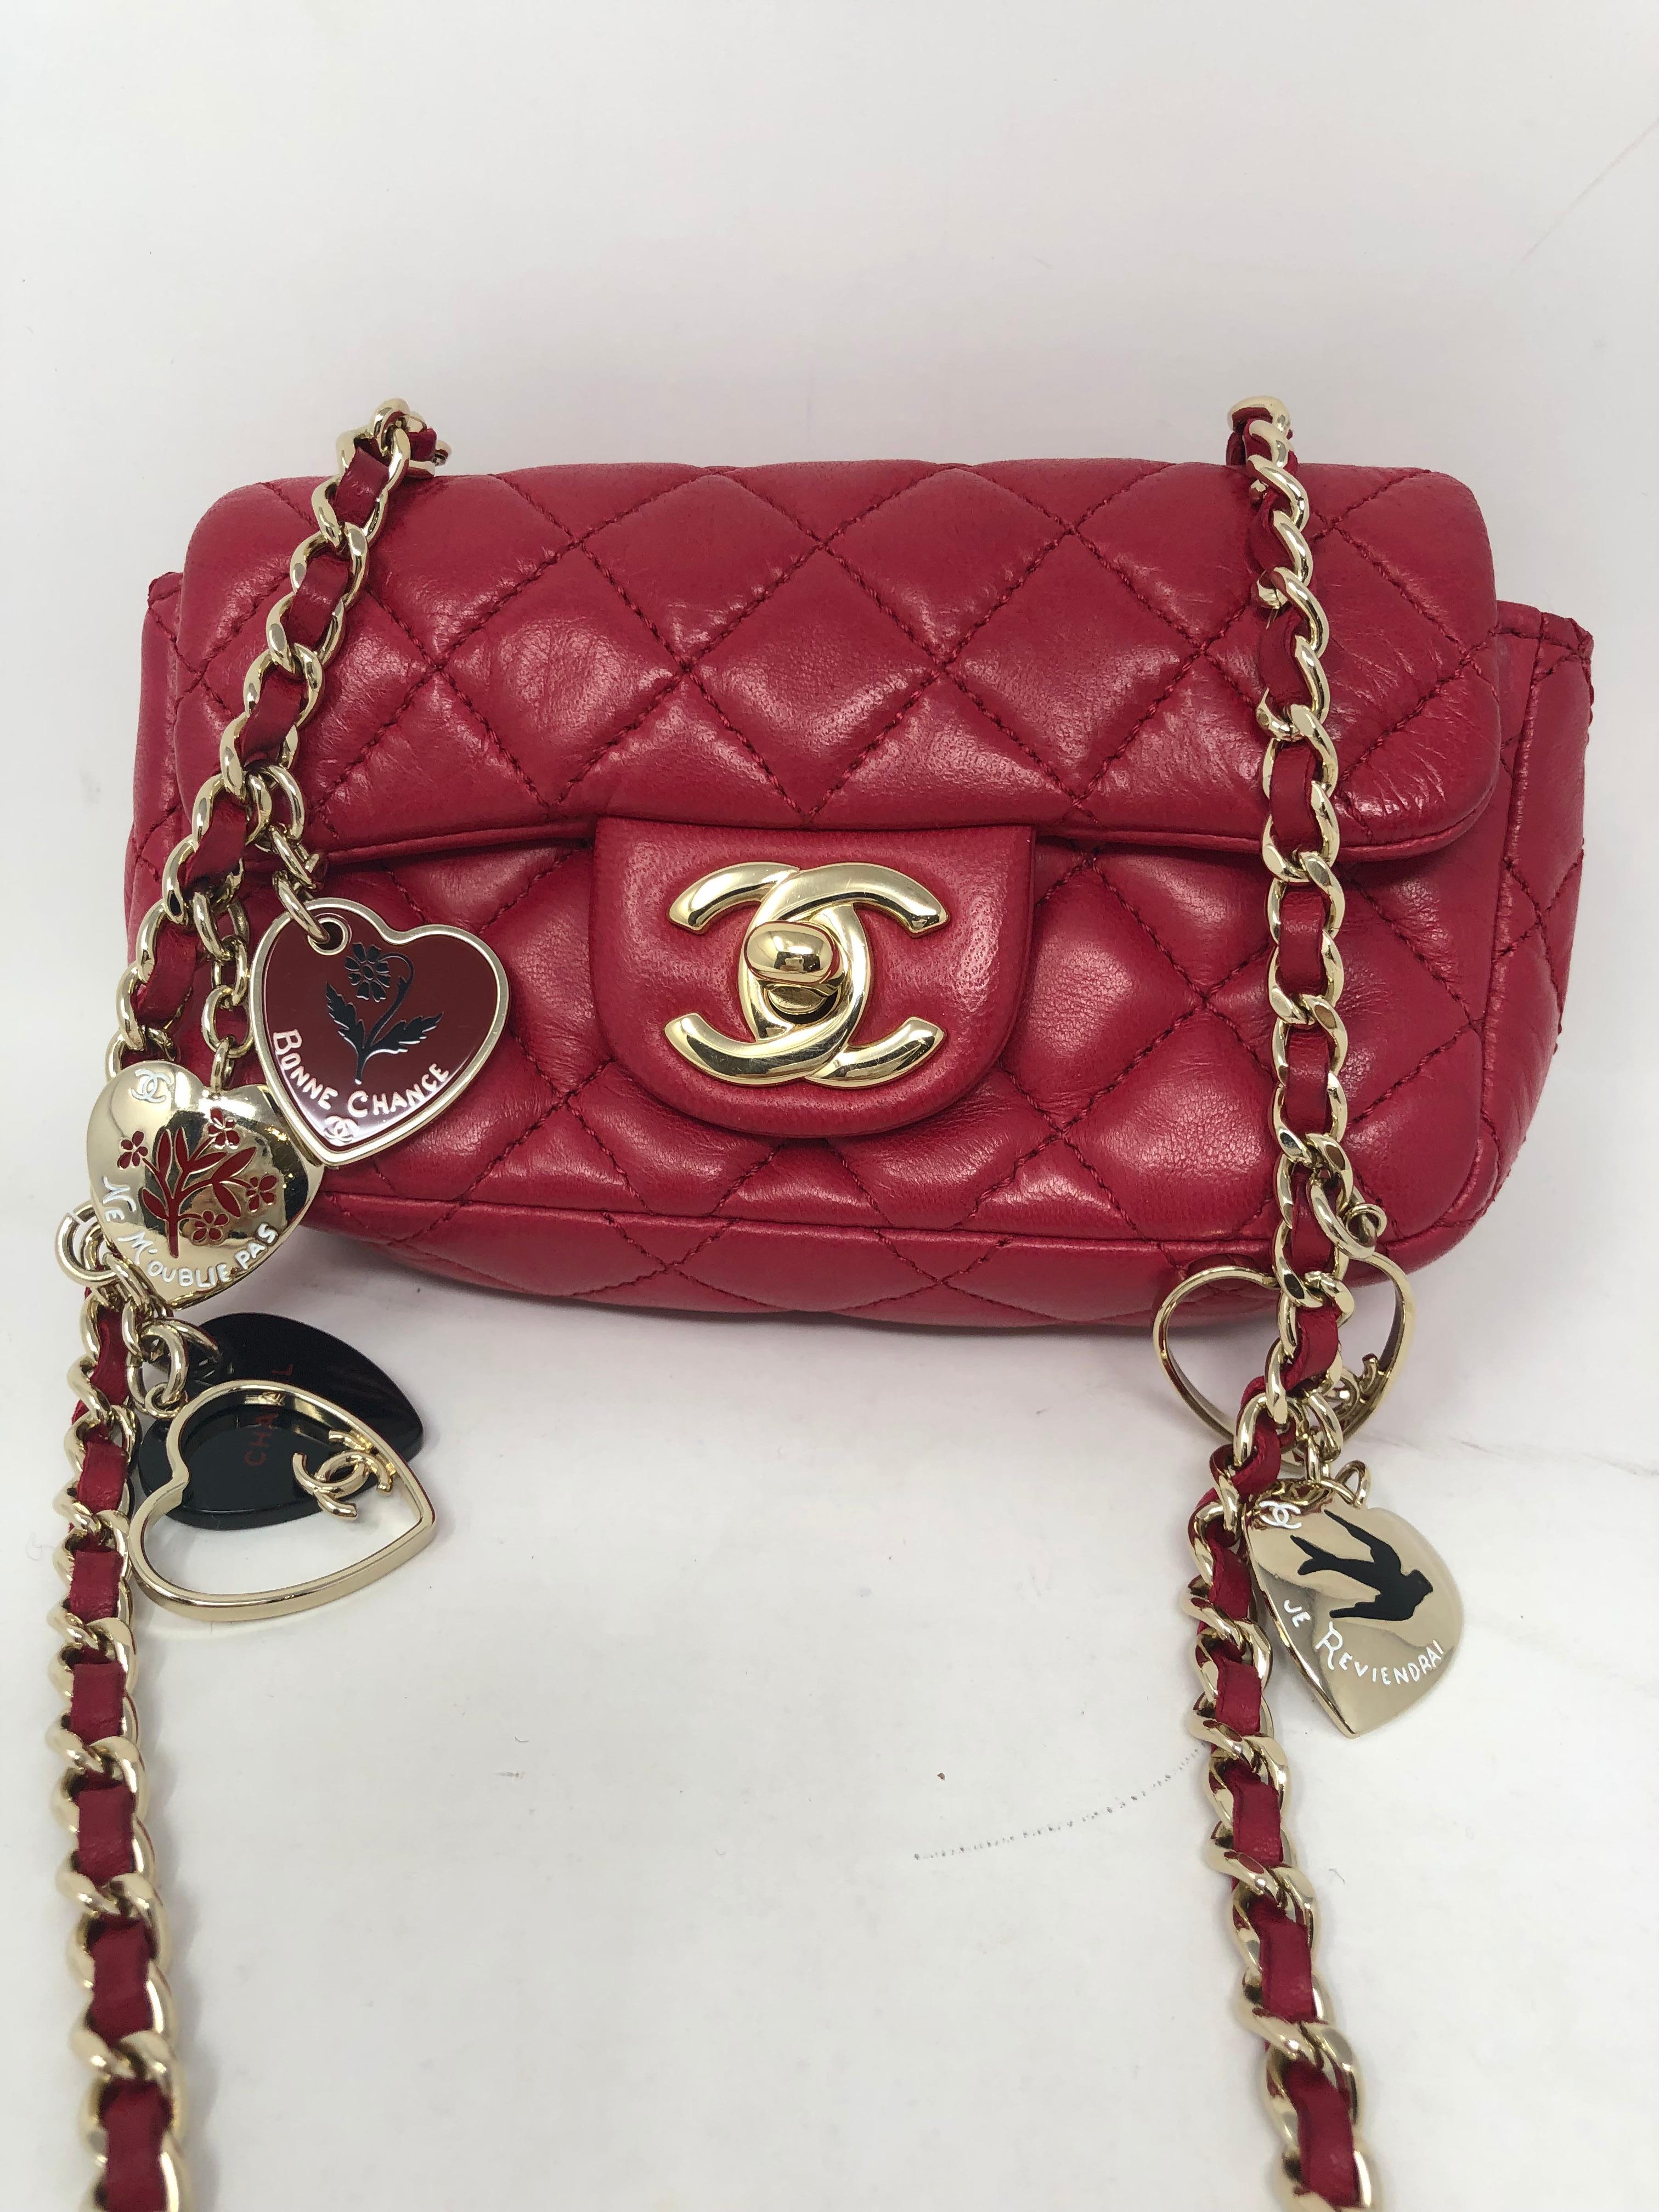 Chanel XS Mini Hot Pink Valentine's Bag. Crossbody Mini with heart charms in gold hardware. Mint condition. Cute Collector's Chanel piece. Guaranteed authentic. 